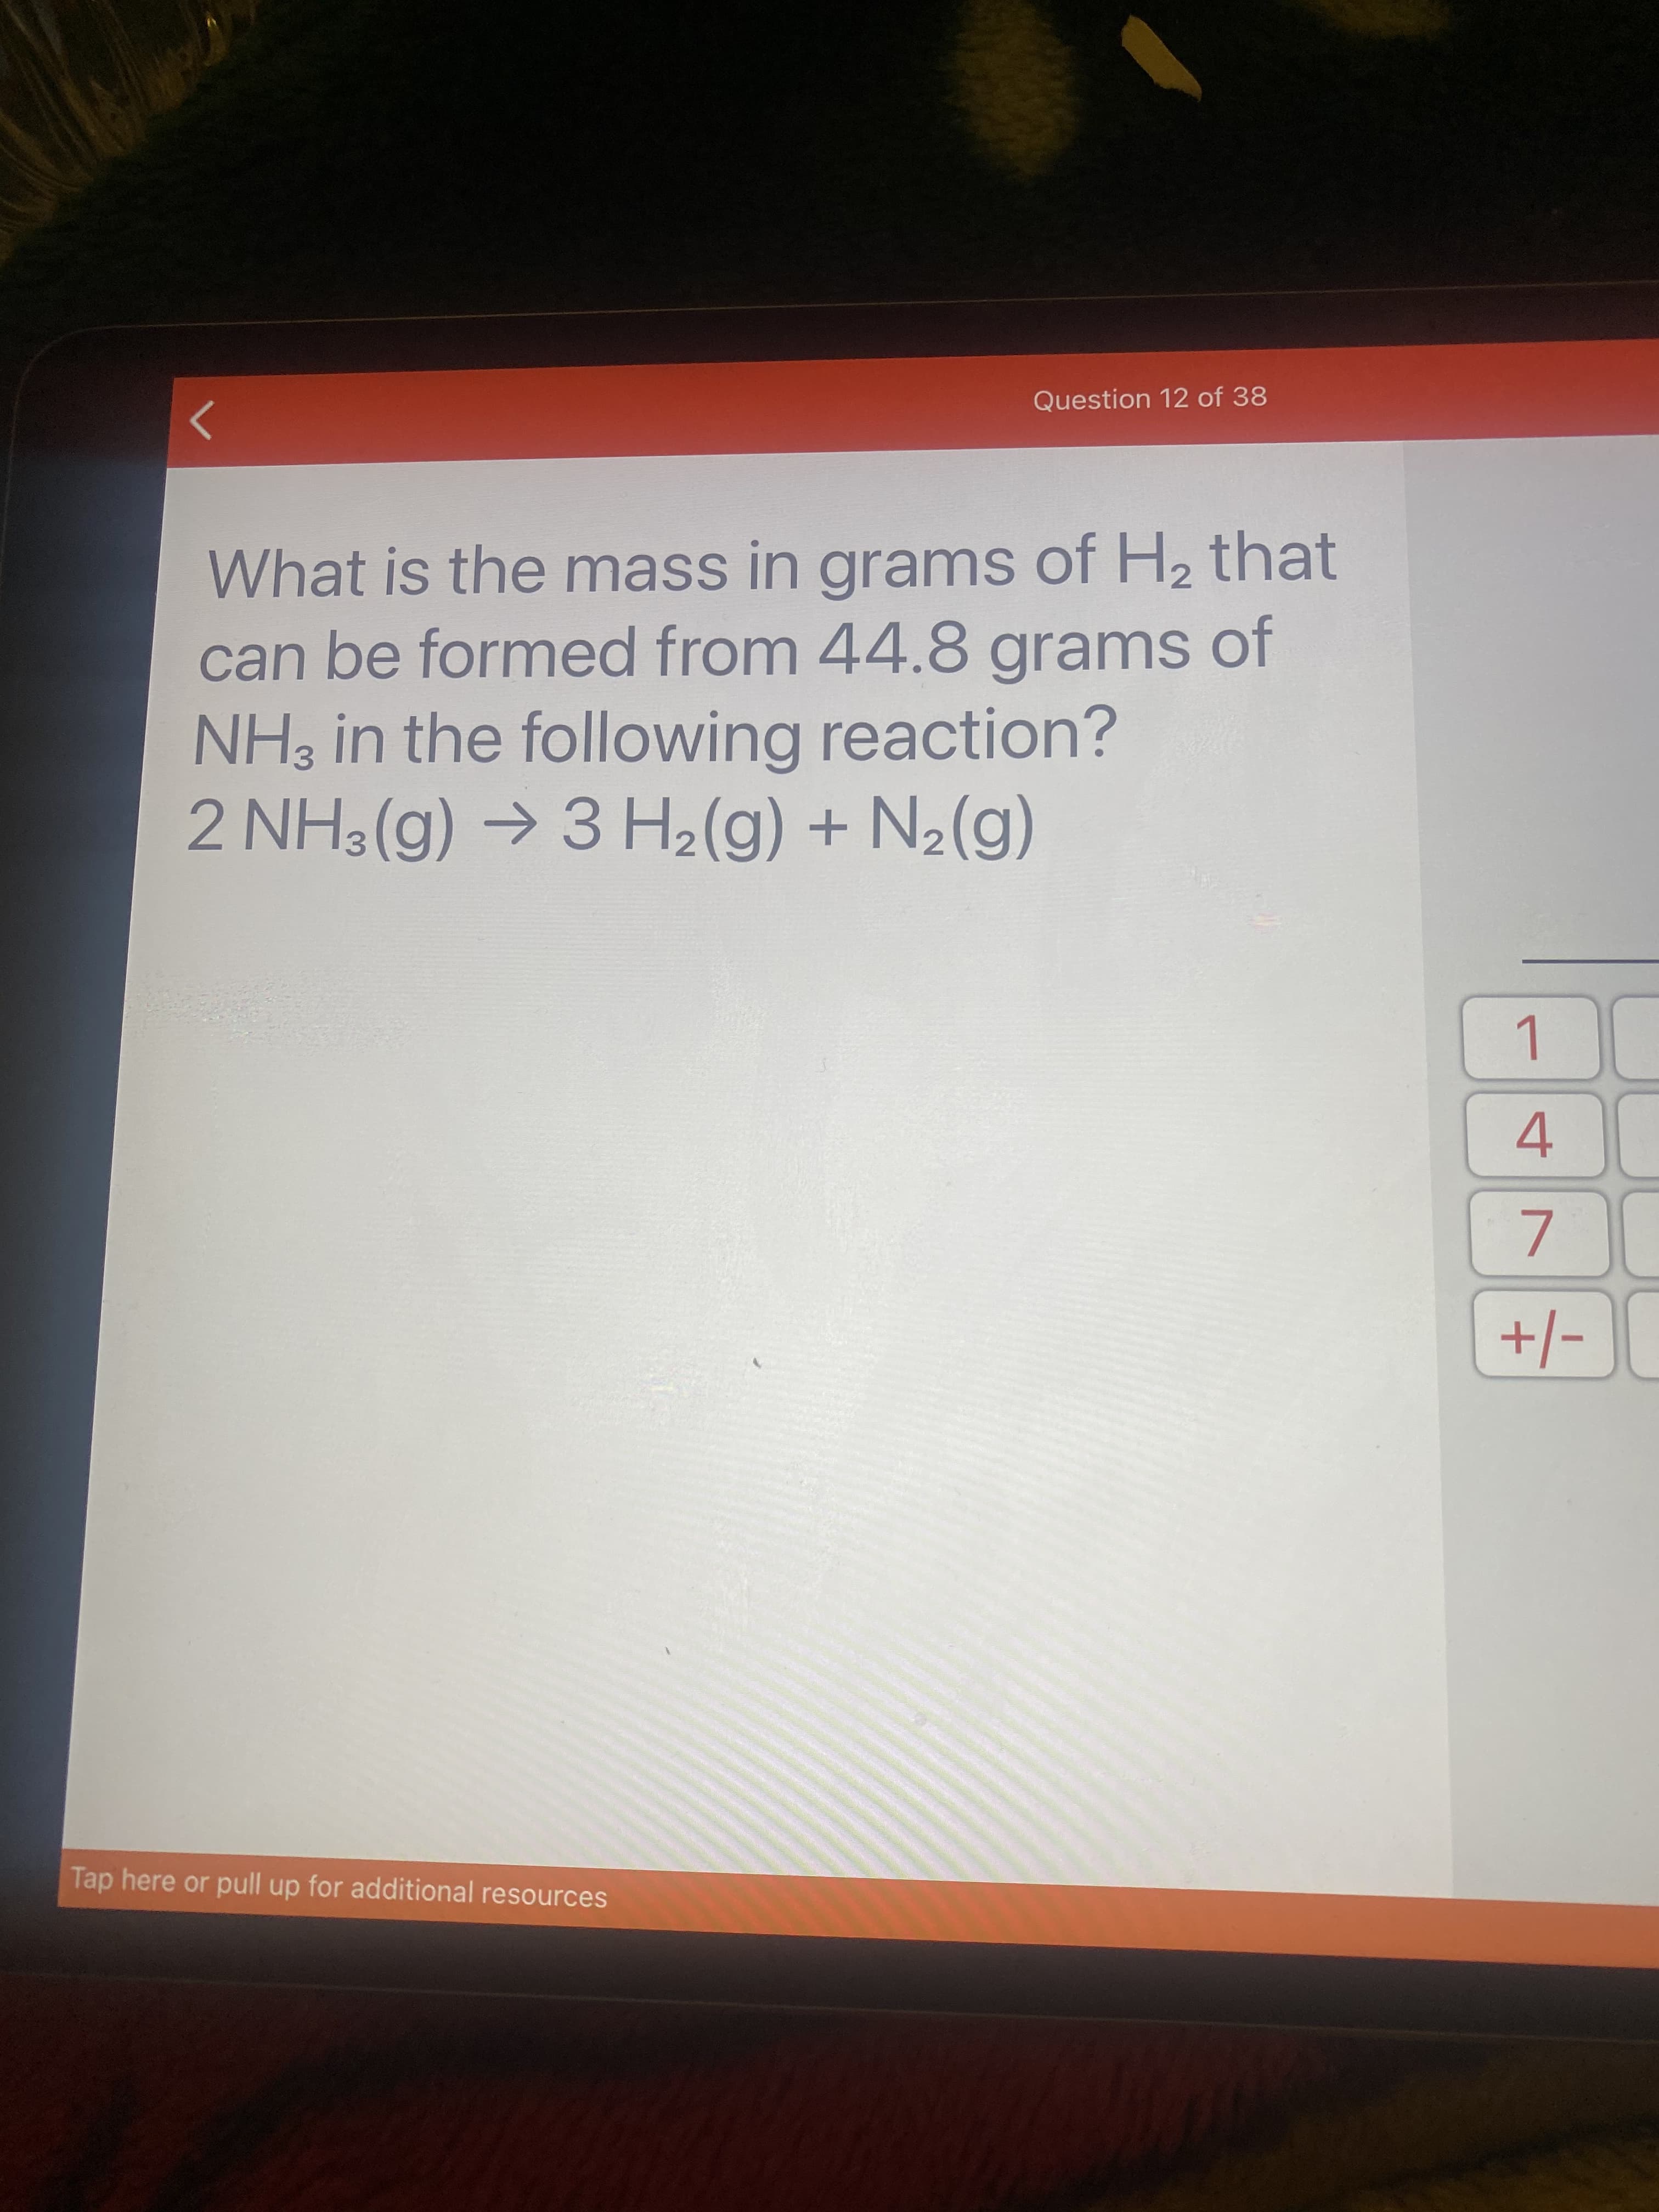 What is the mass in grams of H2 that
can be formed from 44.8 grams of
NH3 in the following reaction?
2 NH3 (g) →3 H2(g) + N2(g)
